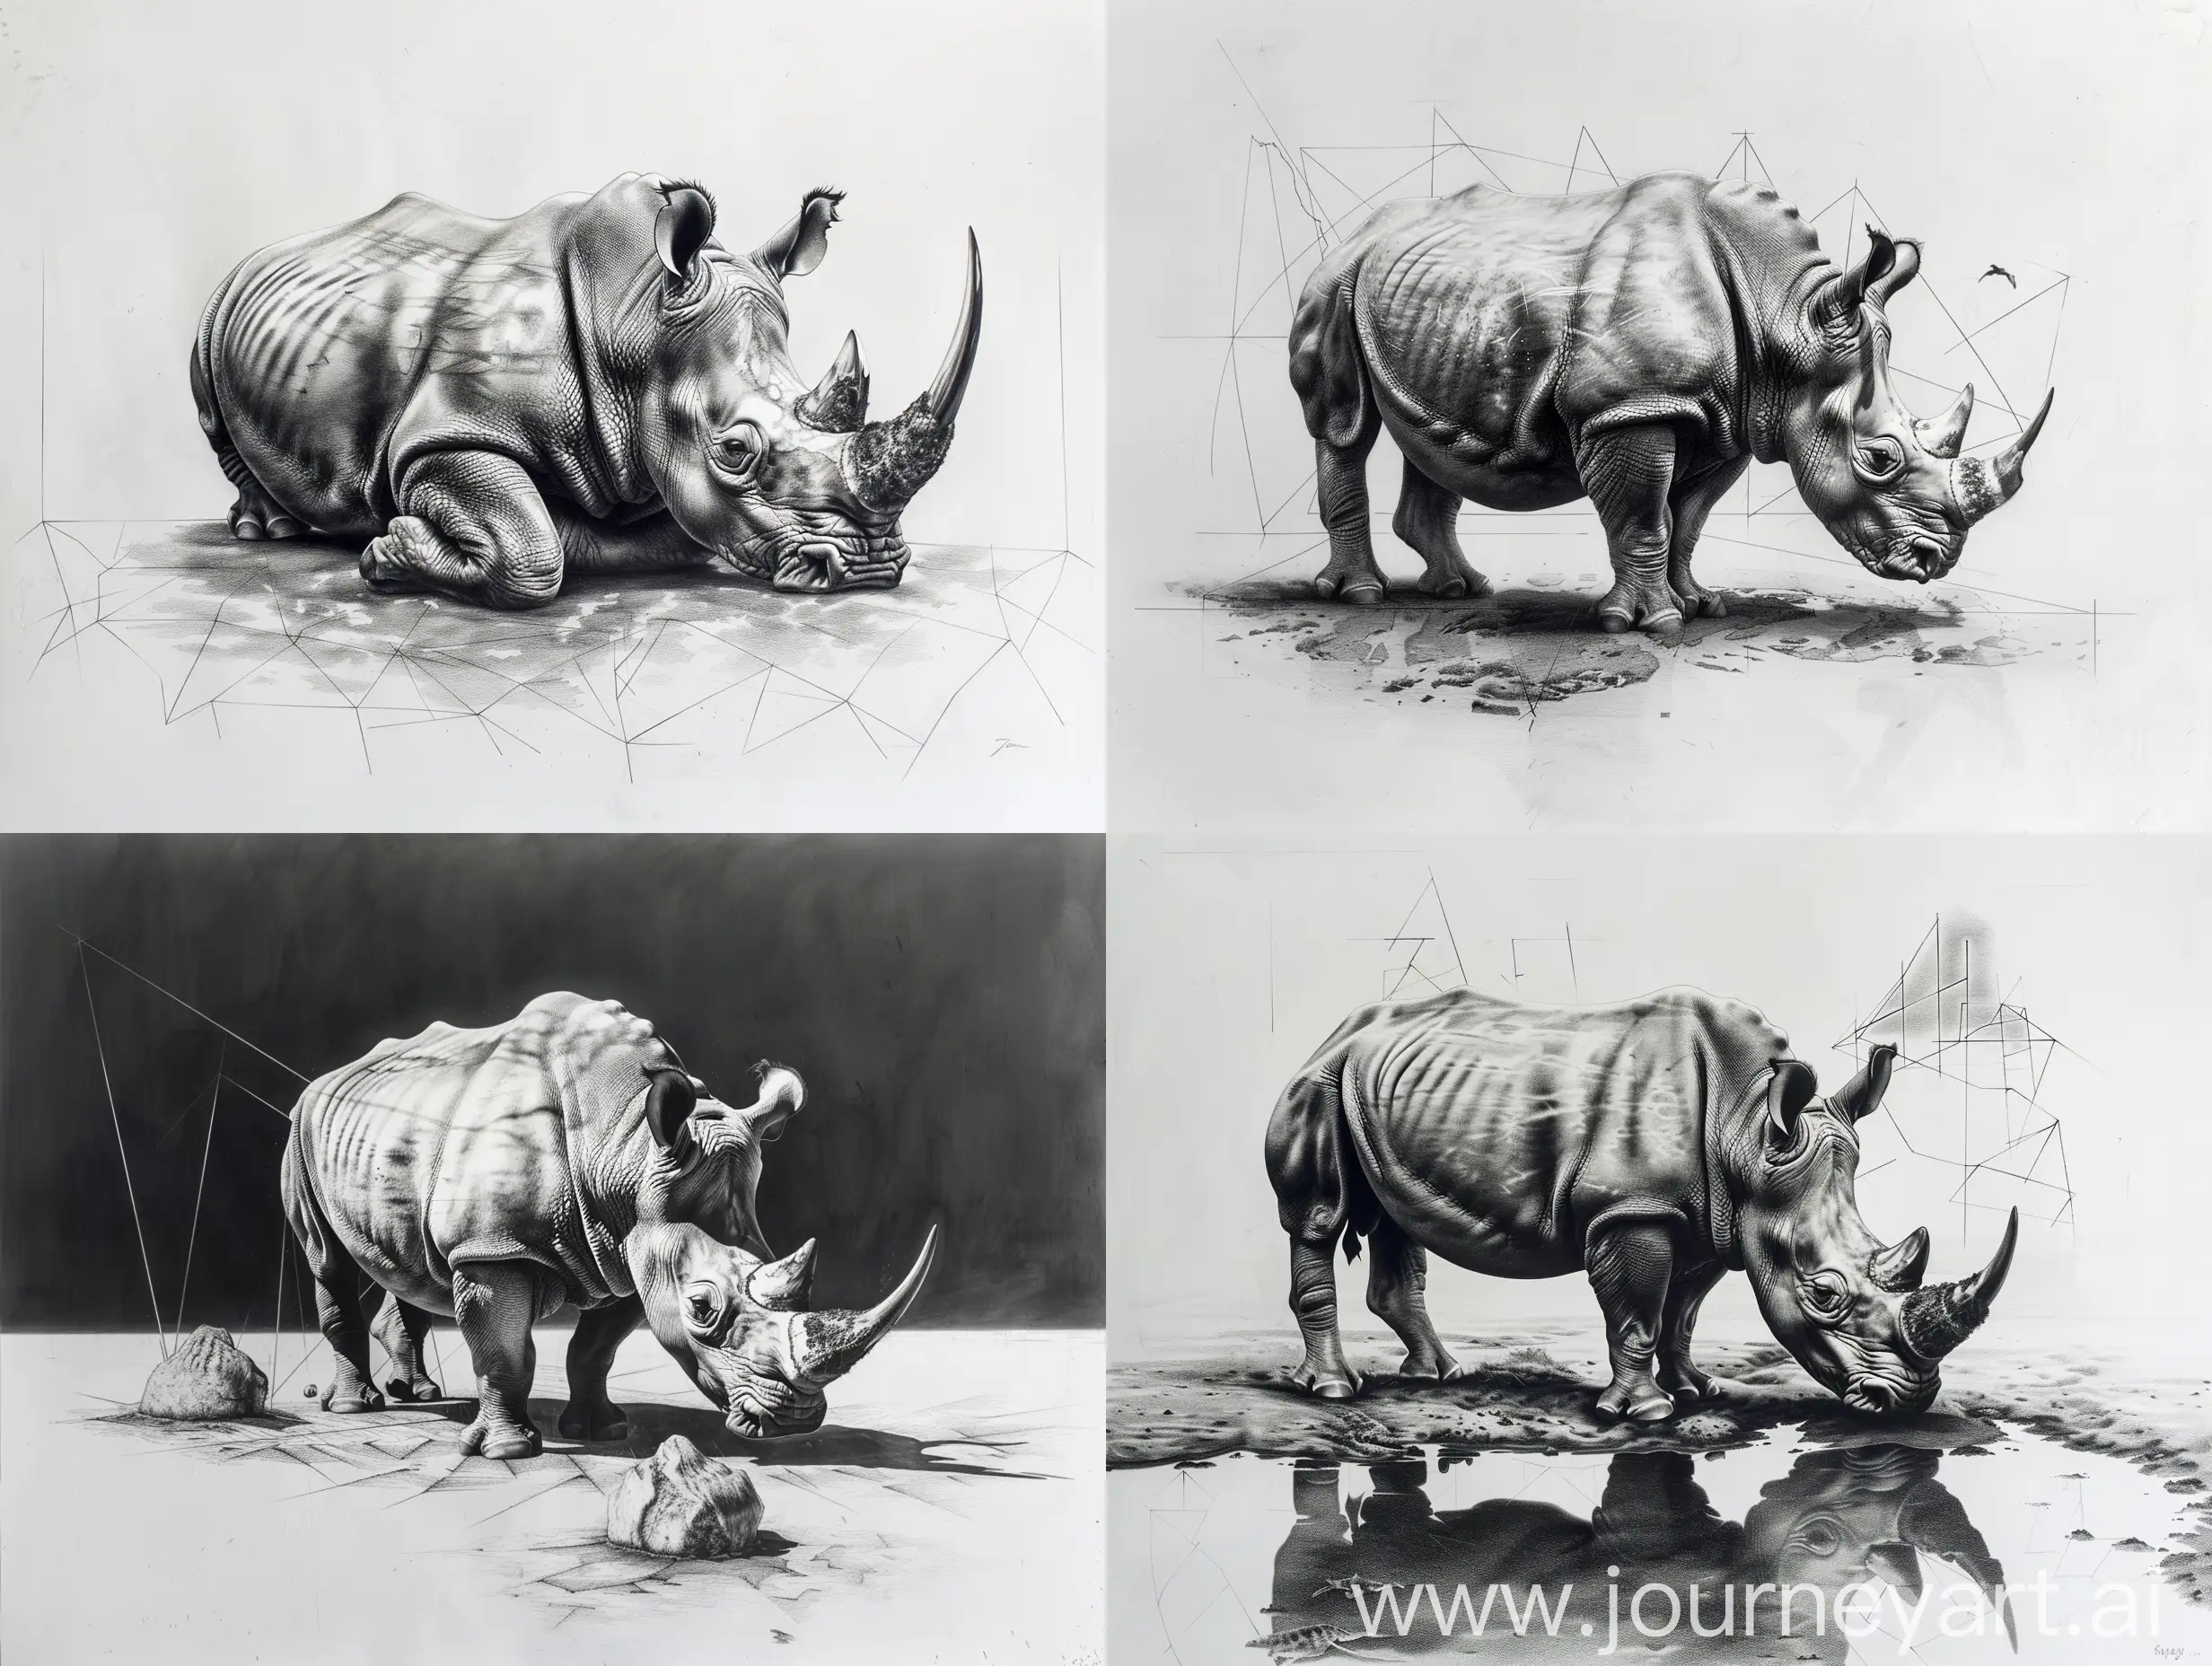 genre creative dark hyper realistic pencil sketch of a rhino in solitude on a large canvas in great details